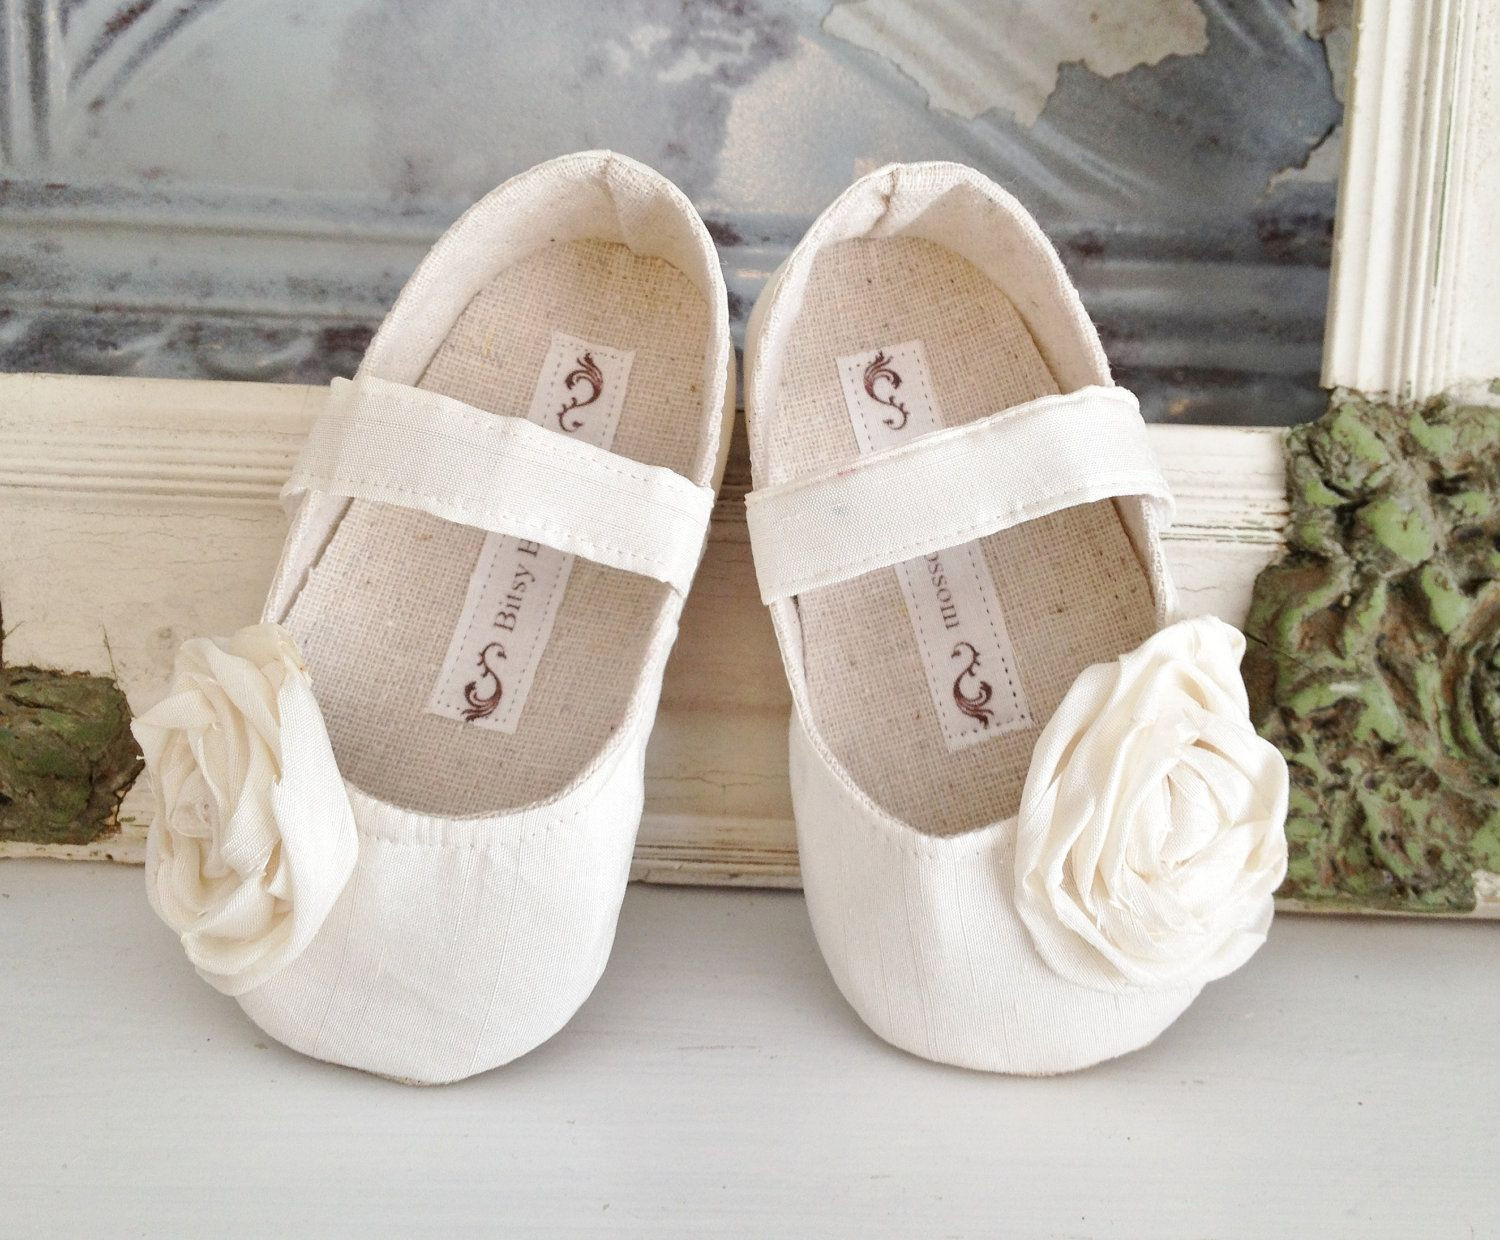 Toddler Wedding Shoes
 Baby Girl Shoes Toddler Girl Shoes Infant Shoes Soft Soled